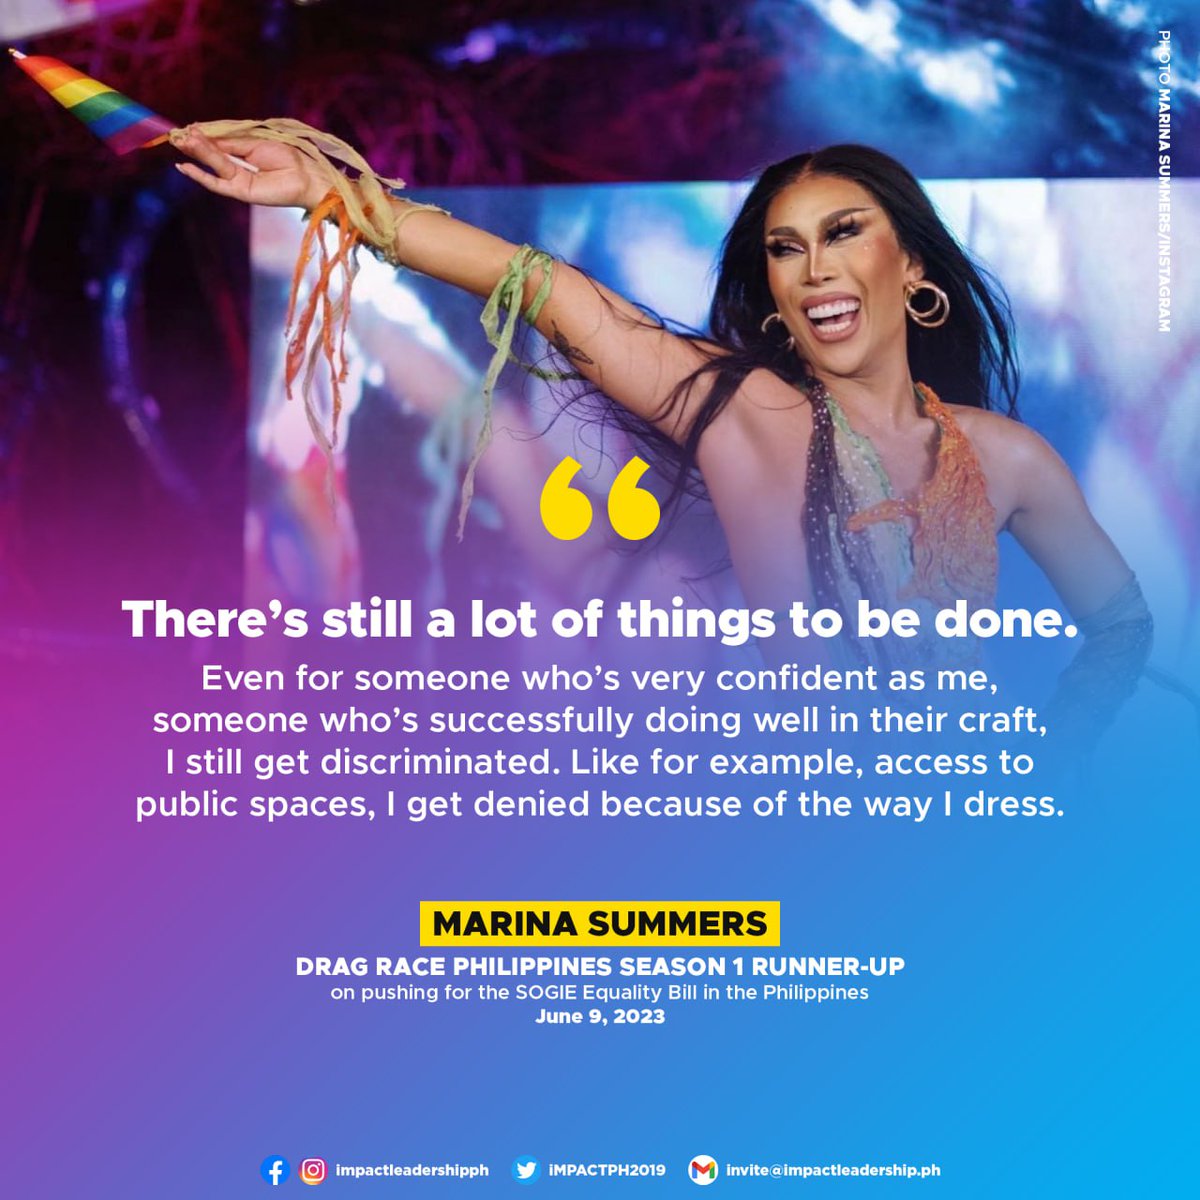 'THERE'S STILL A LOT OF THINGS TO BE DONE' ✊🏳️‍🌈

Drag Race Philippines Season 1 runner-up Marina Summers pushes for the passage of the SOGIE Equality Bill in the Philippines. #PassSOGIEBillNow

m.facebook.com/story.php?stor…